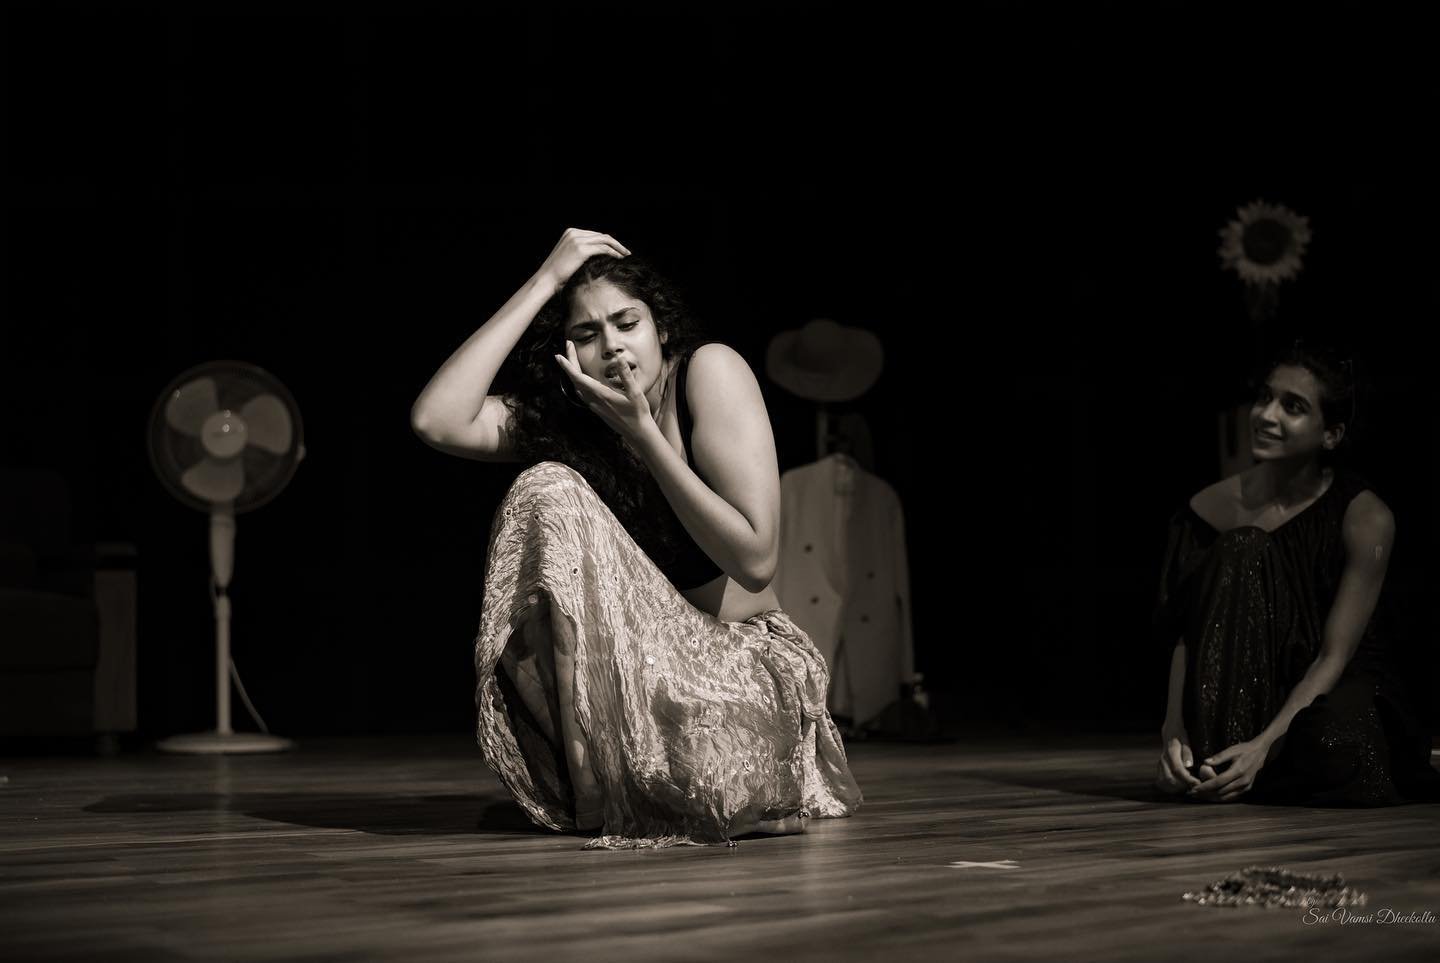 Faria Abdullah in a stage performance 